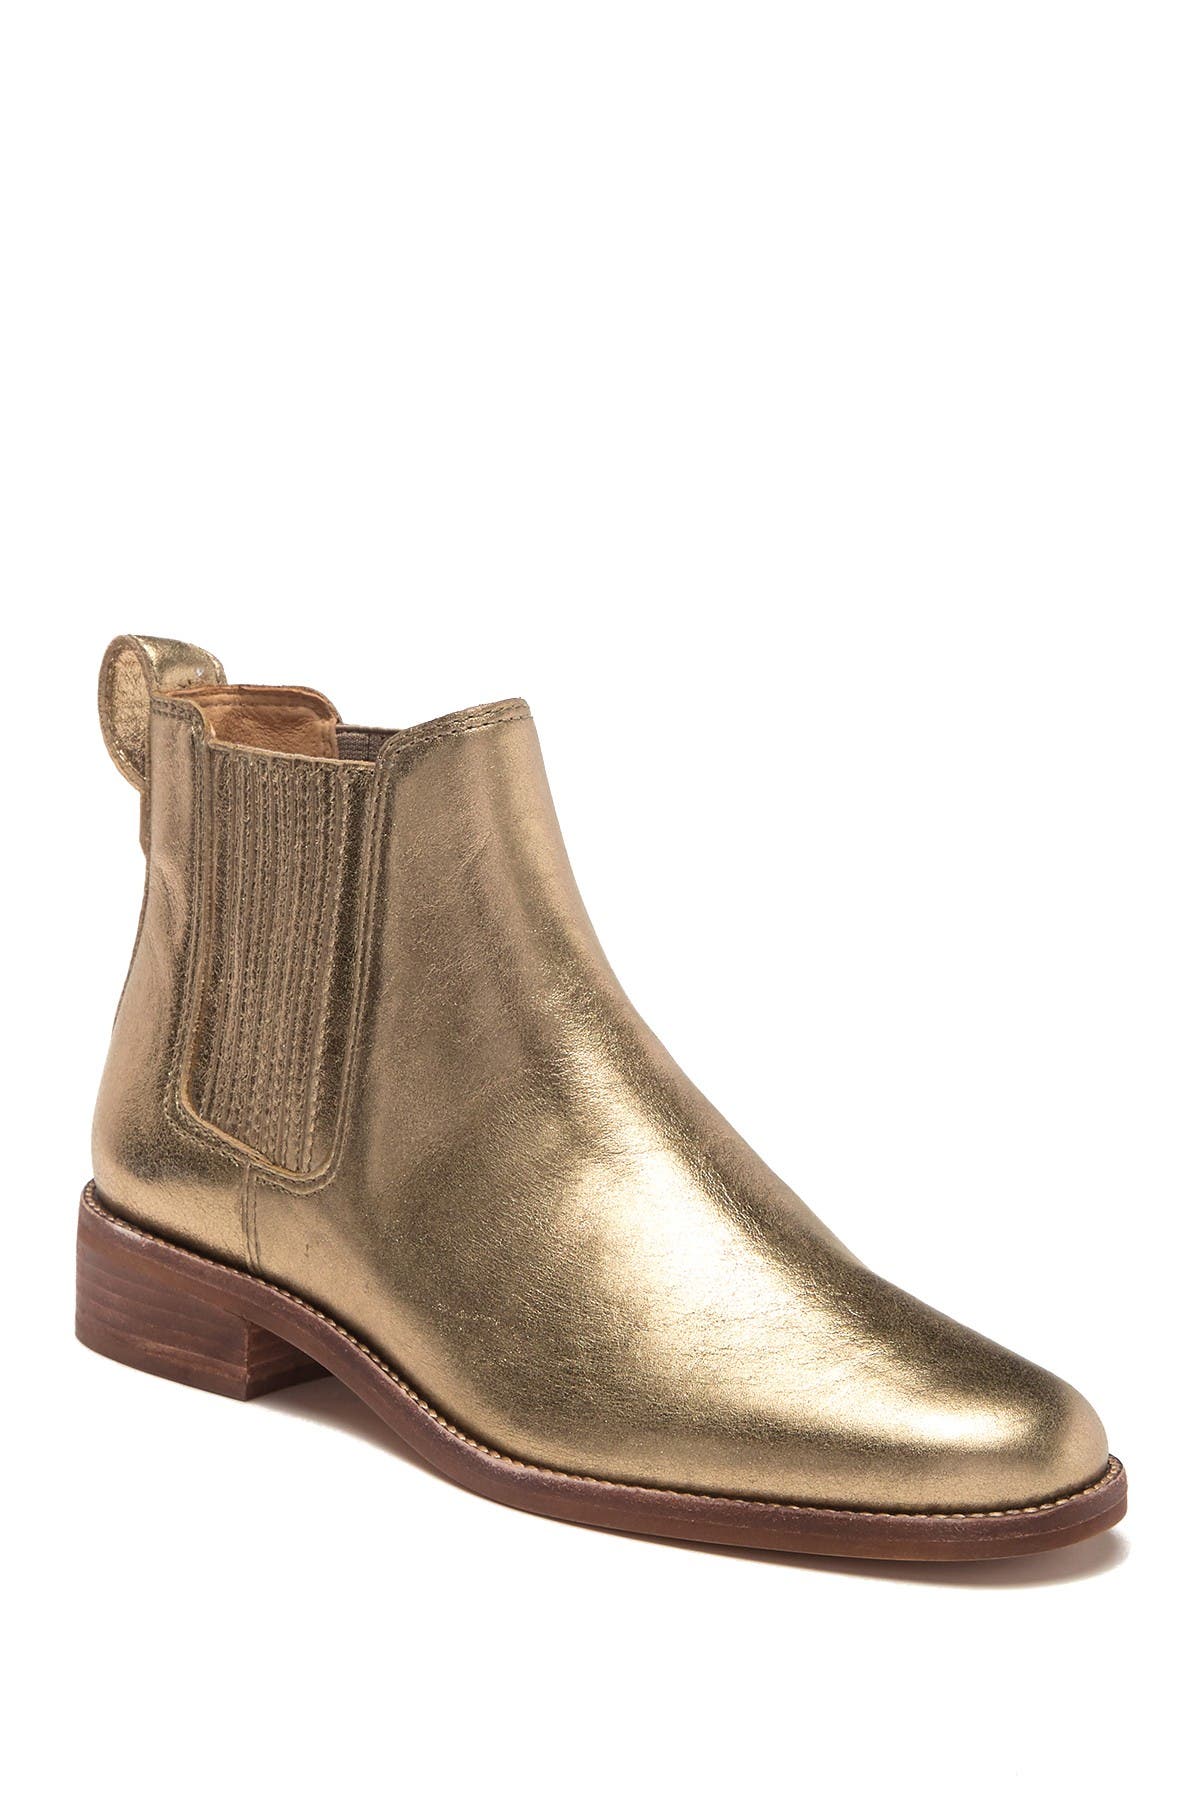 madewell ainsley chelsea boot review